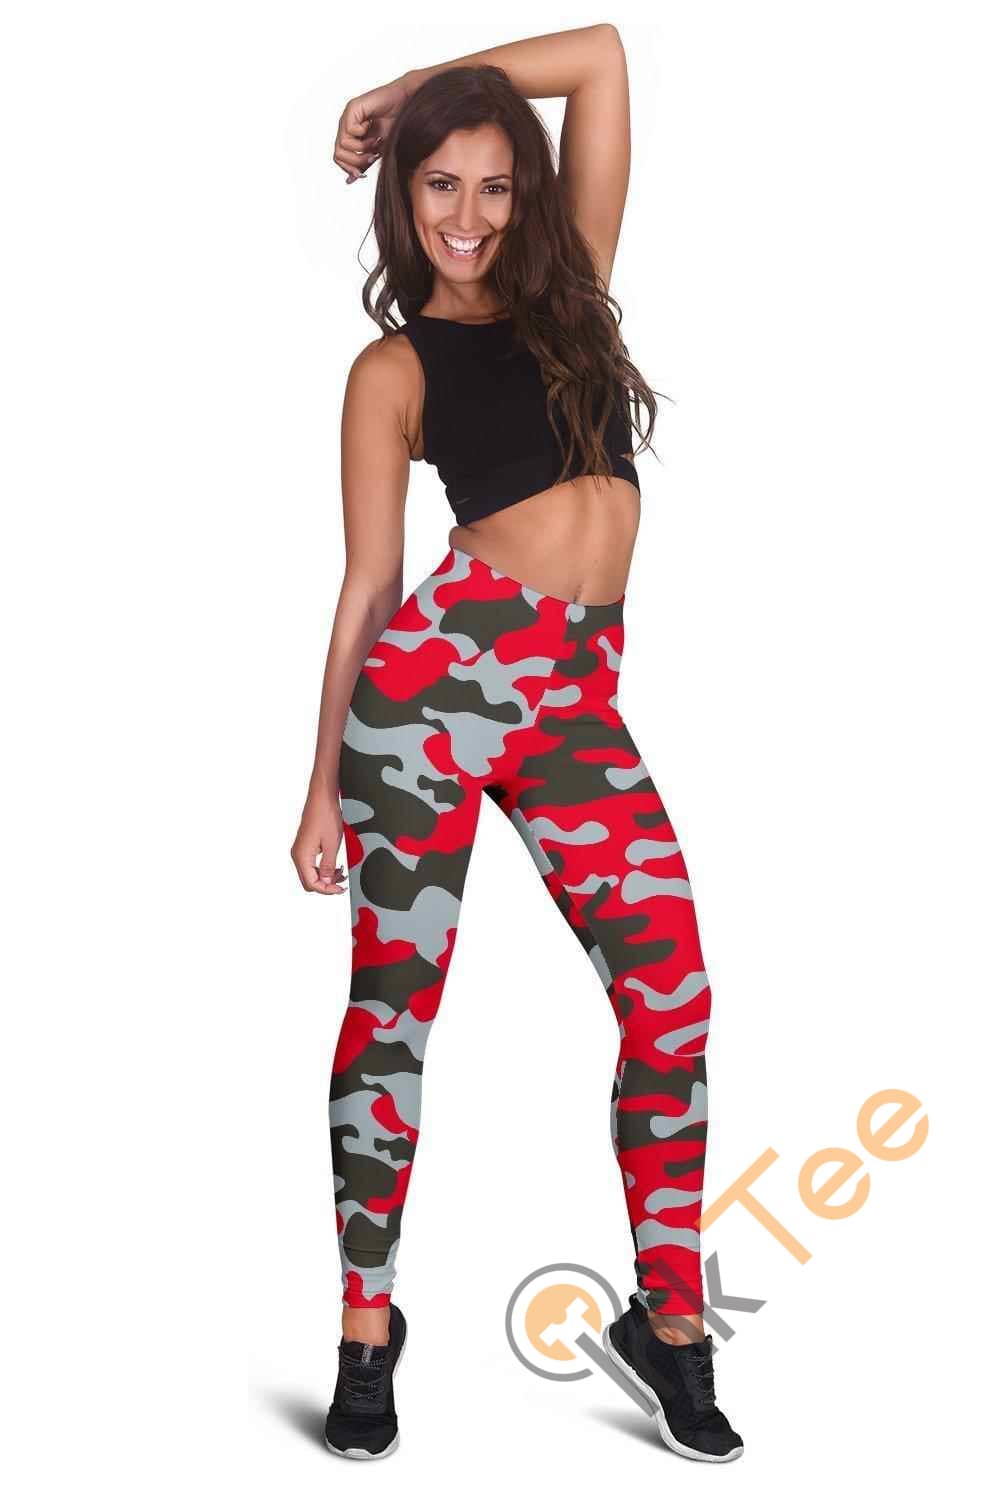 Inktee Store - Tampa Bay Buccaneers Inspired Tru Camo 3D All Over Print For Yoga Fitness Fashion Women'S Leggings Image